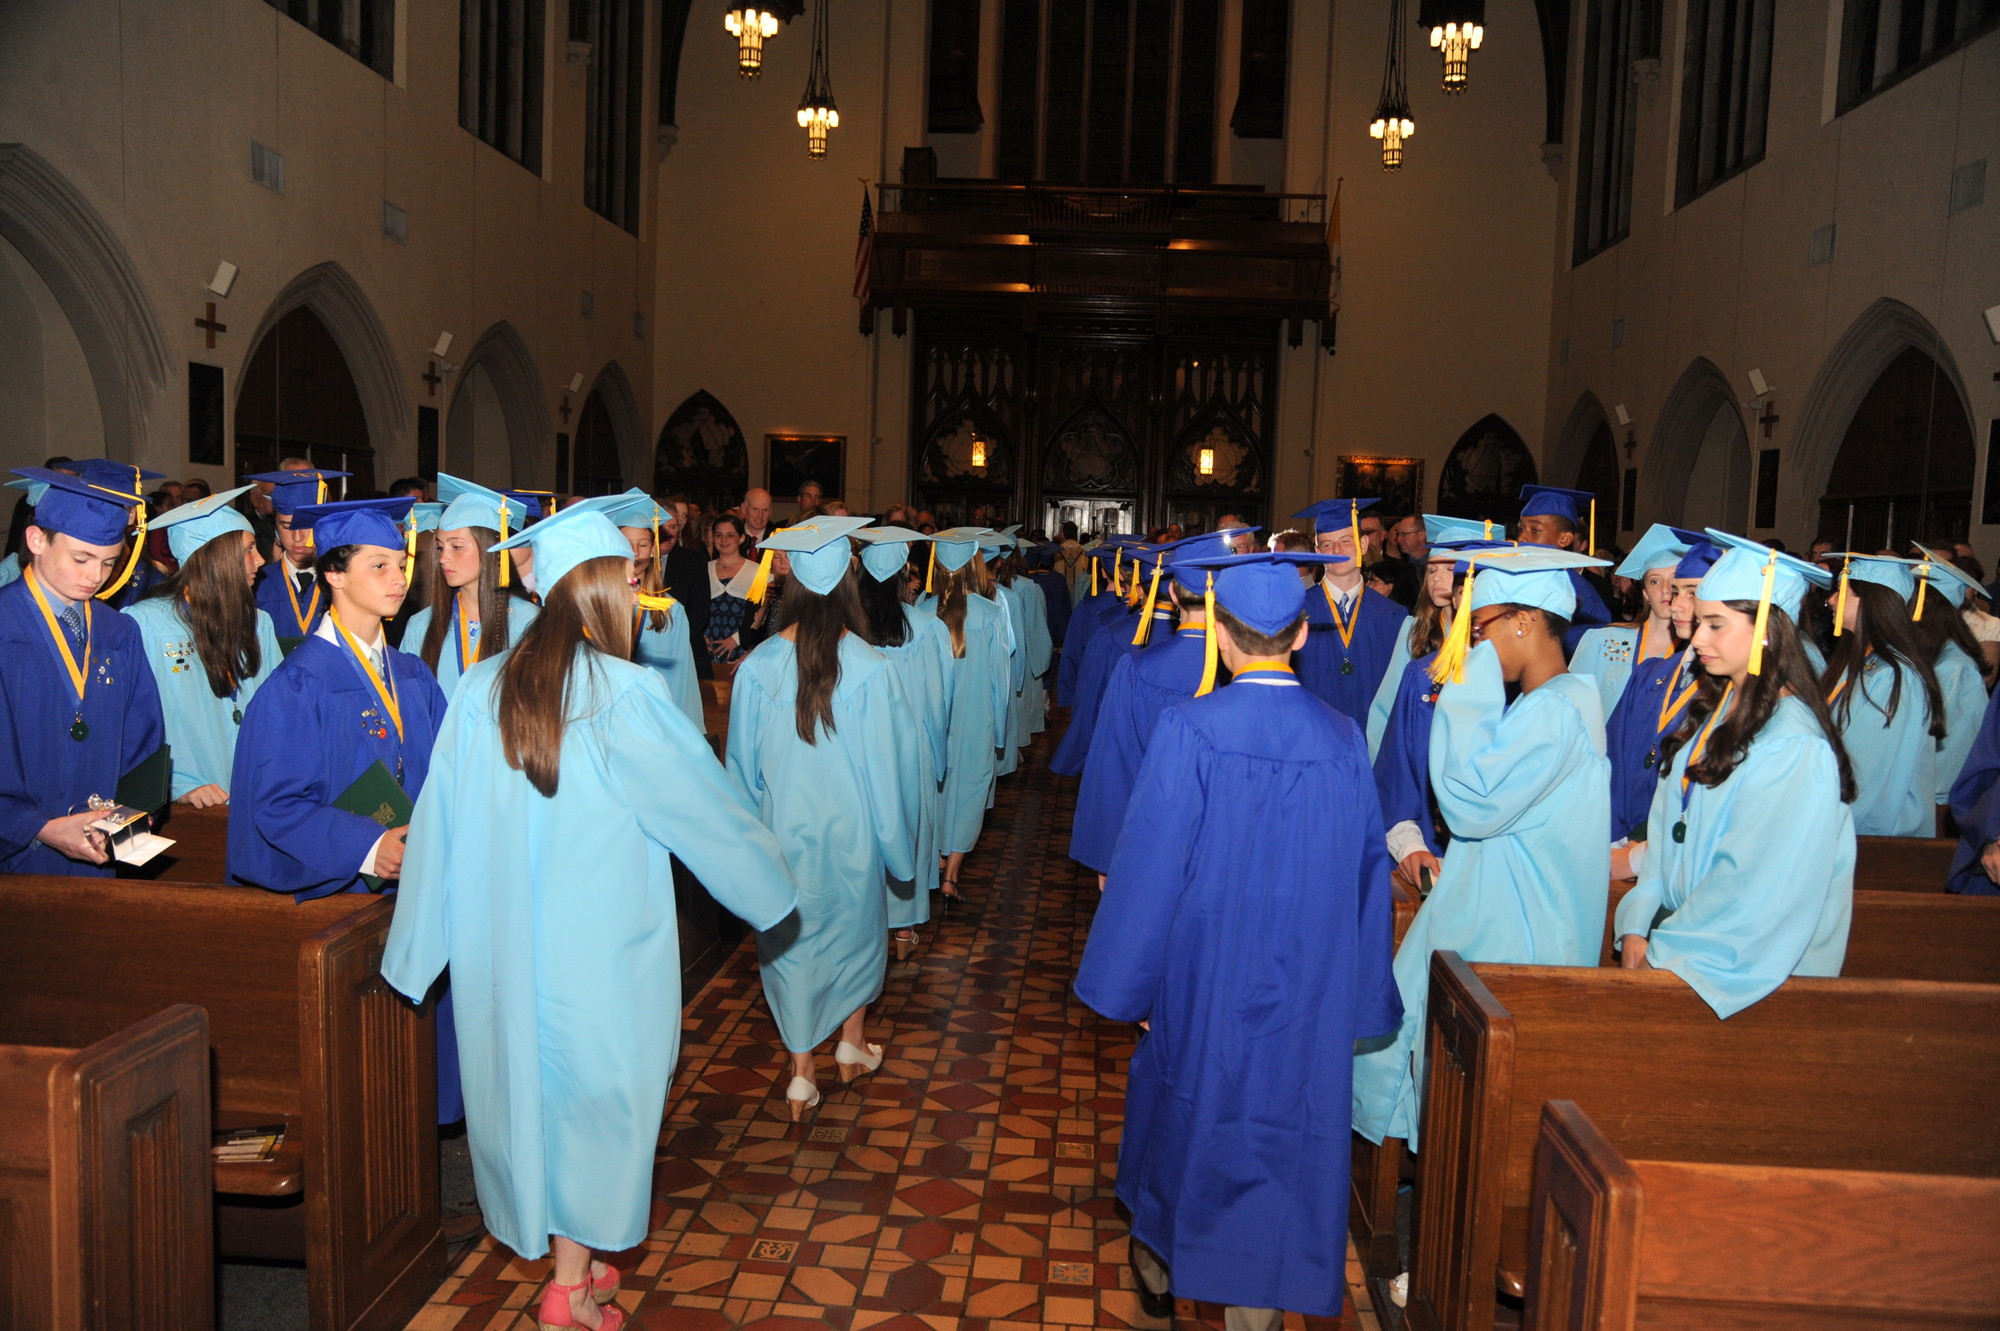 The 90 students of the class of 2013 graduated from St. Agnes Cathedral School on June 7.